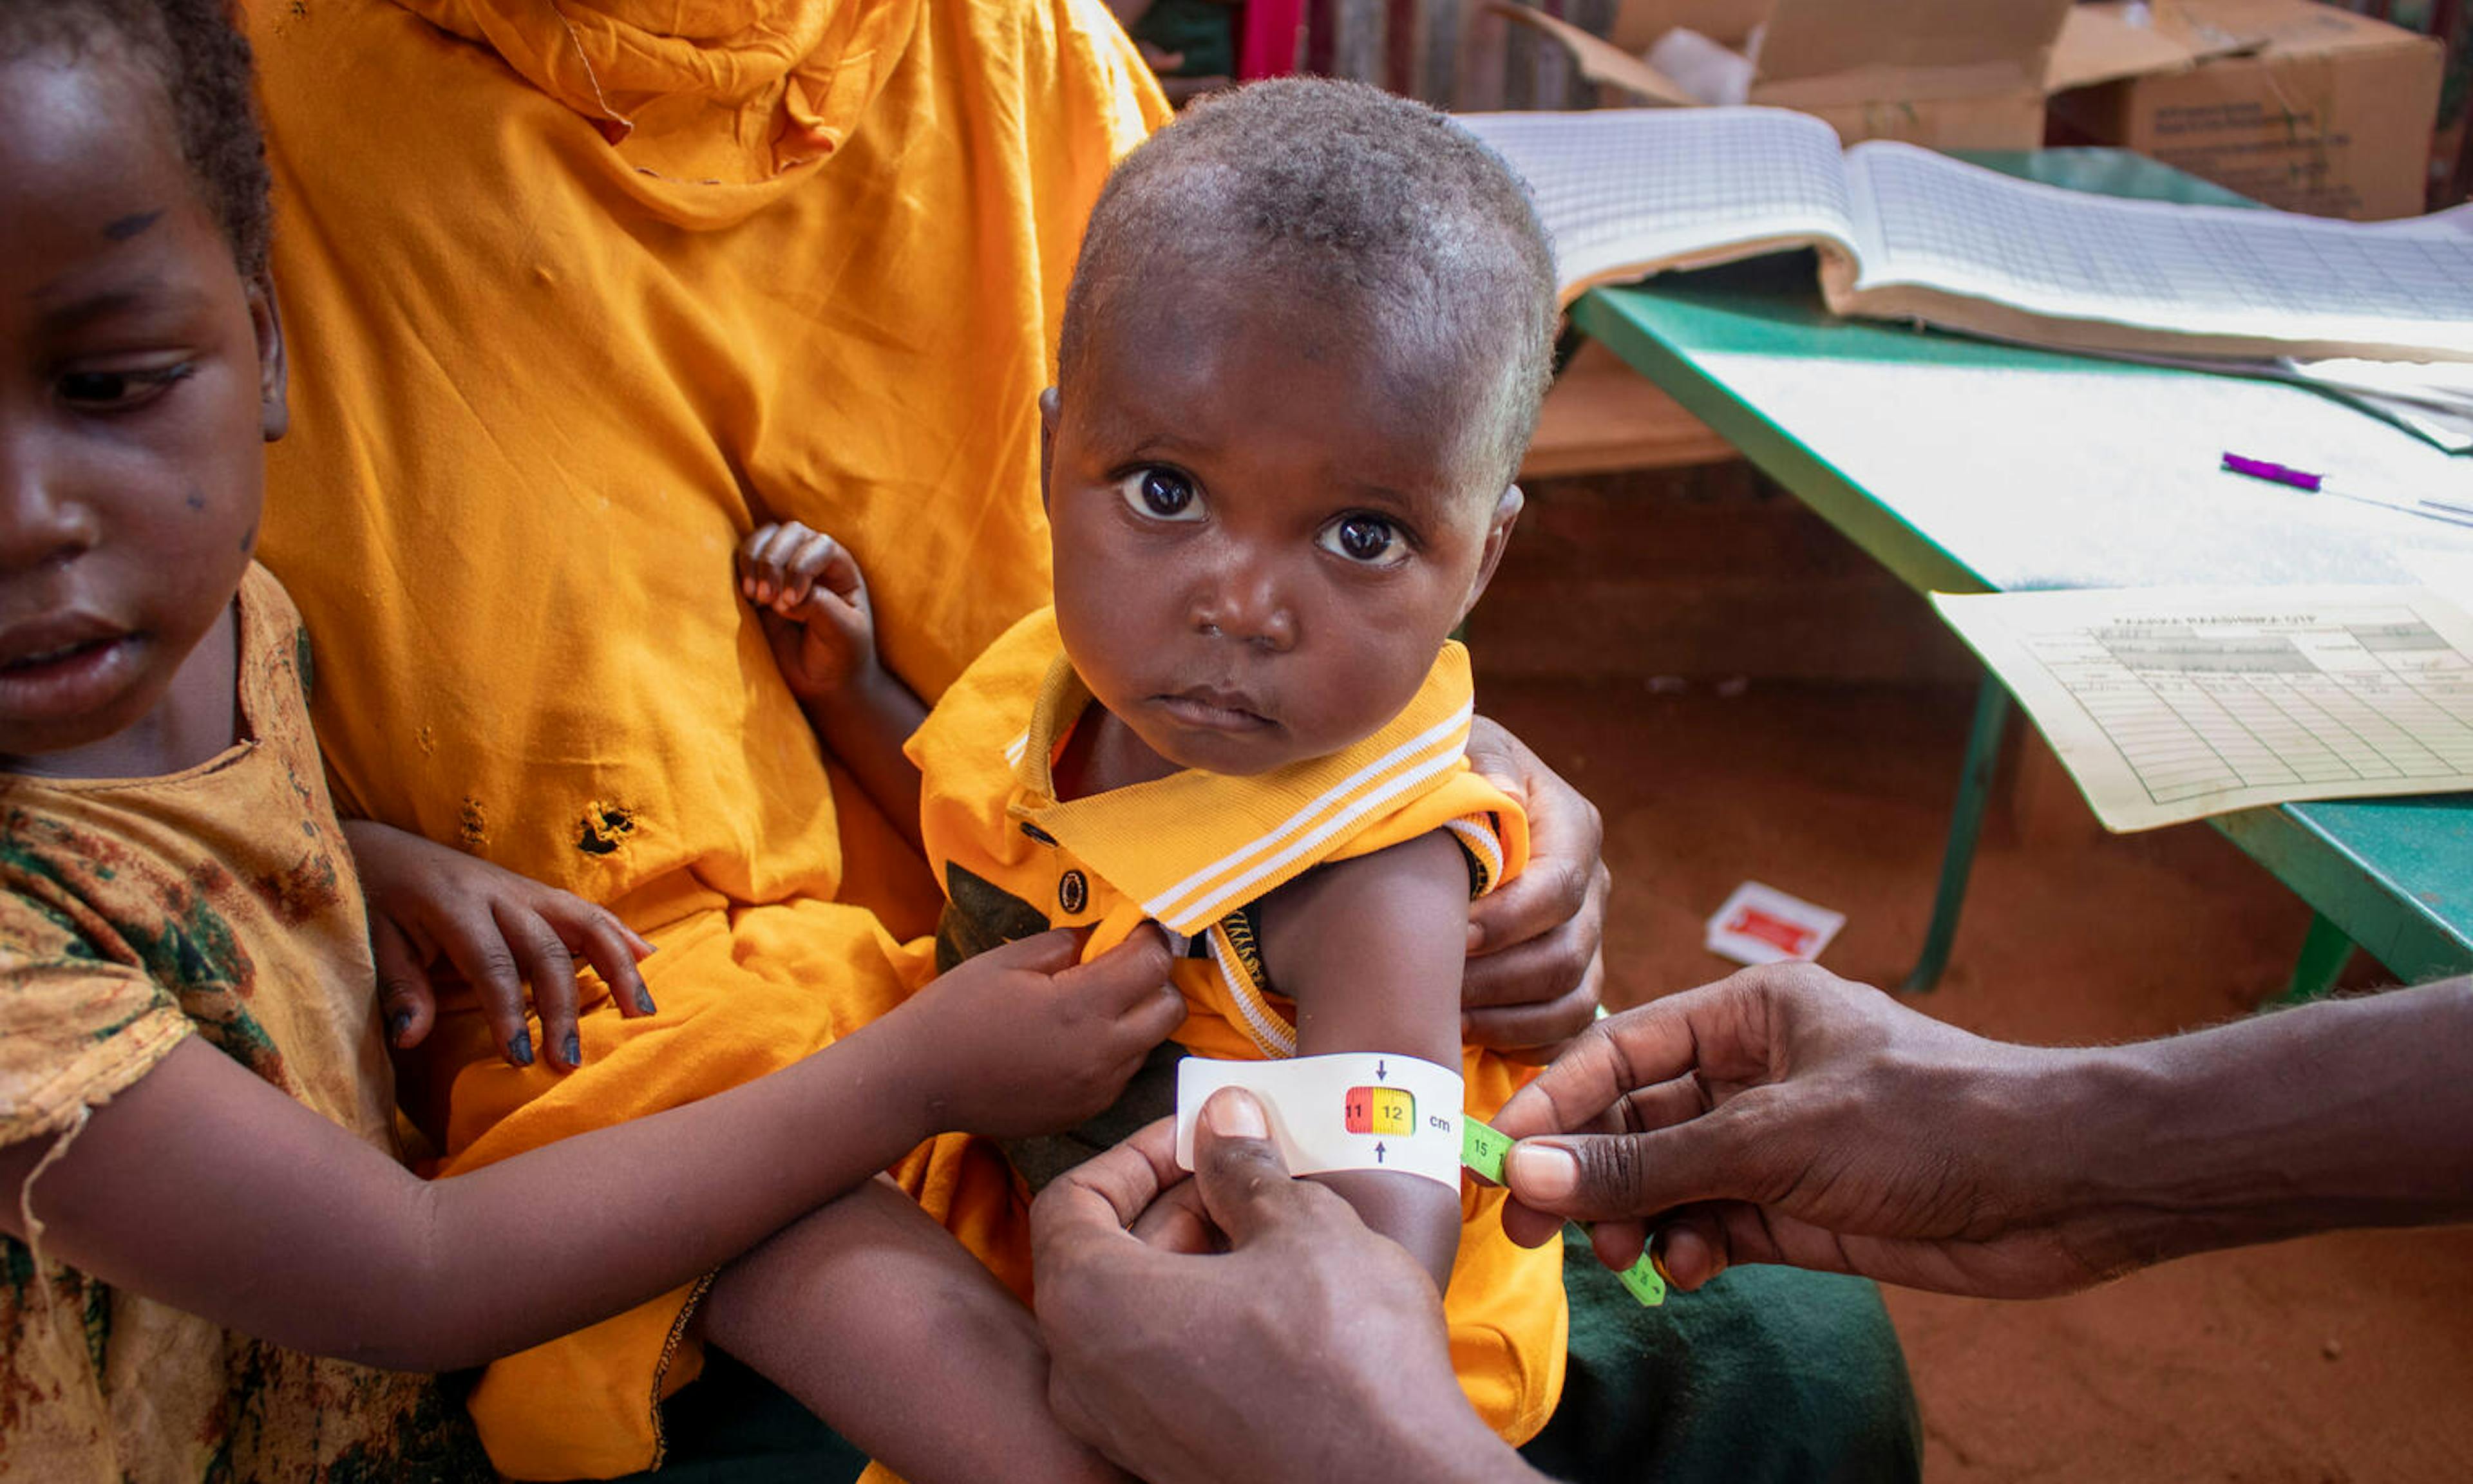 18-month-old Sabir is screened and treated for malnutrition at the Kahary IDP camp in Somalia.